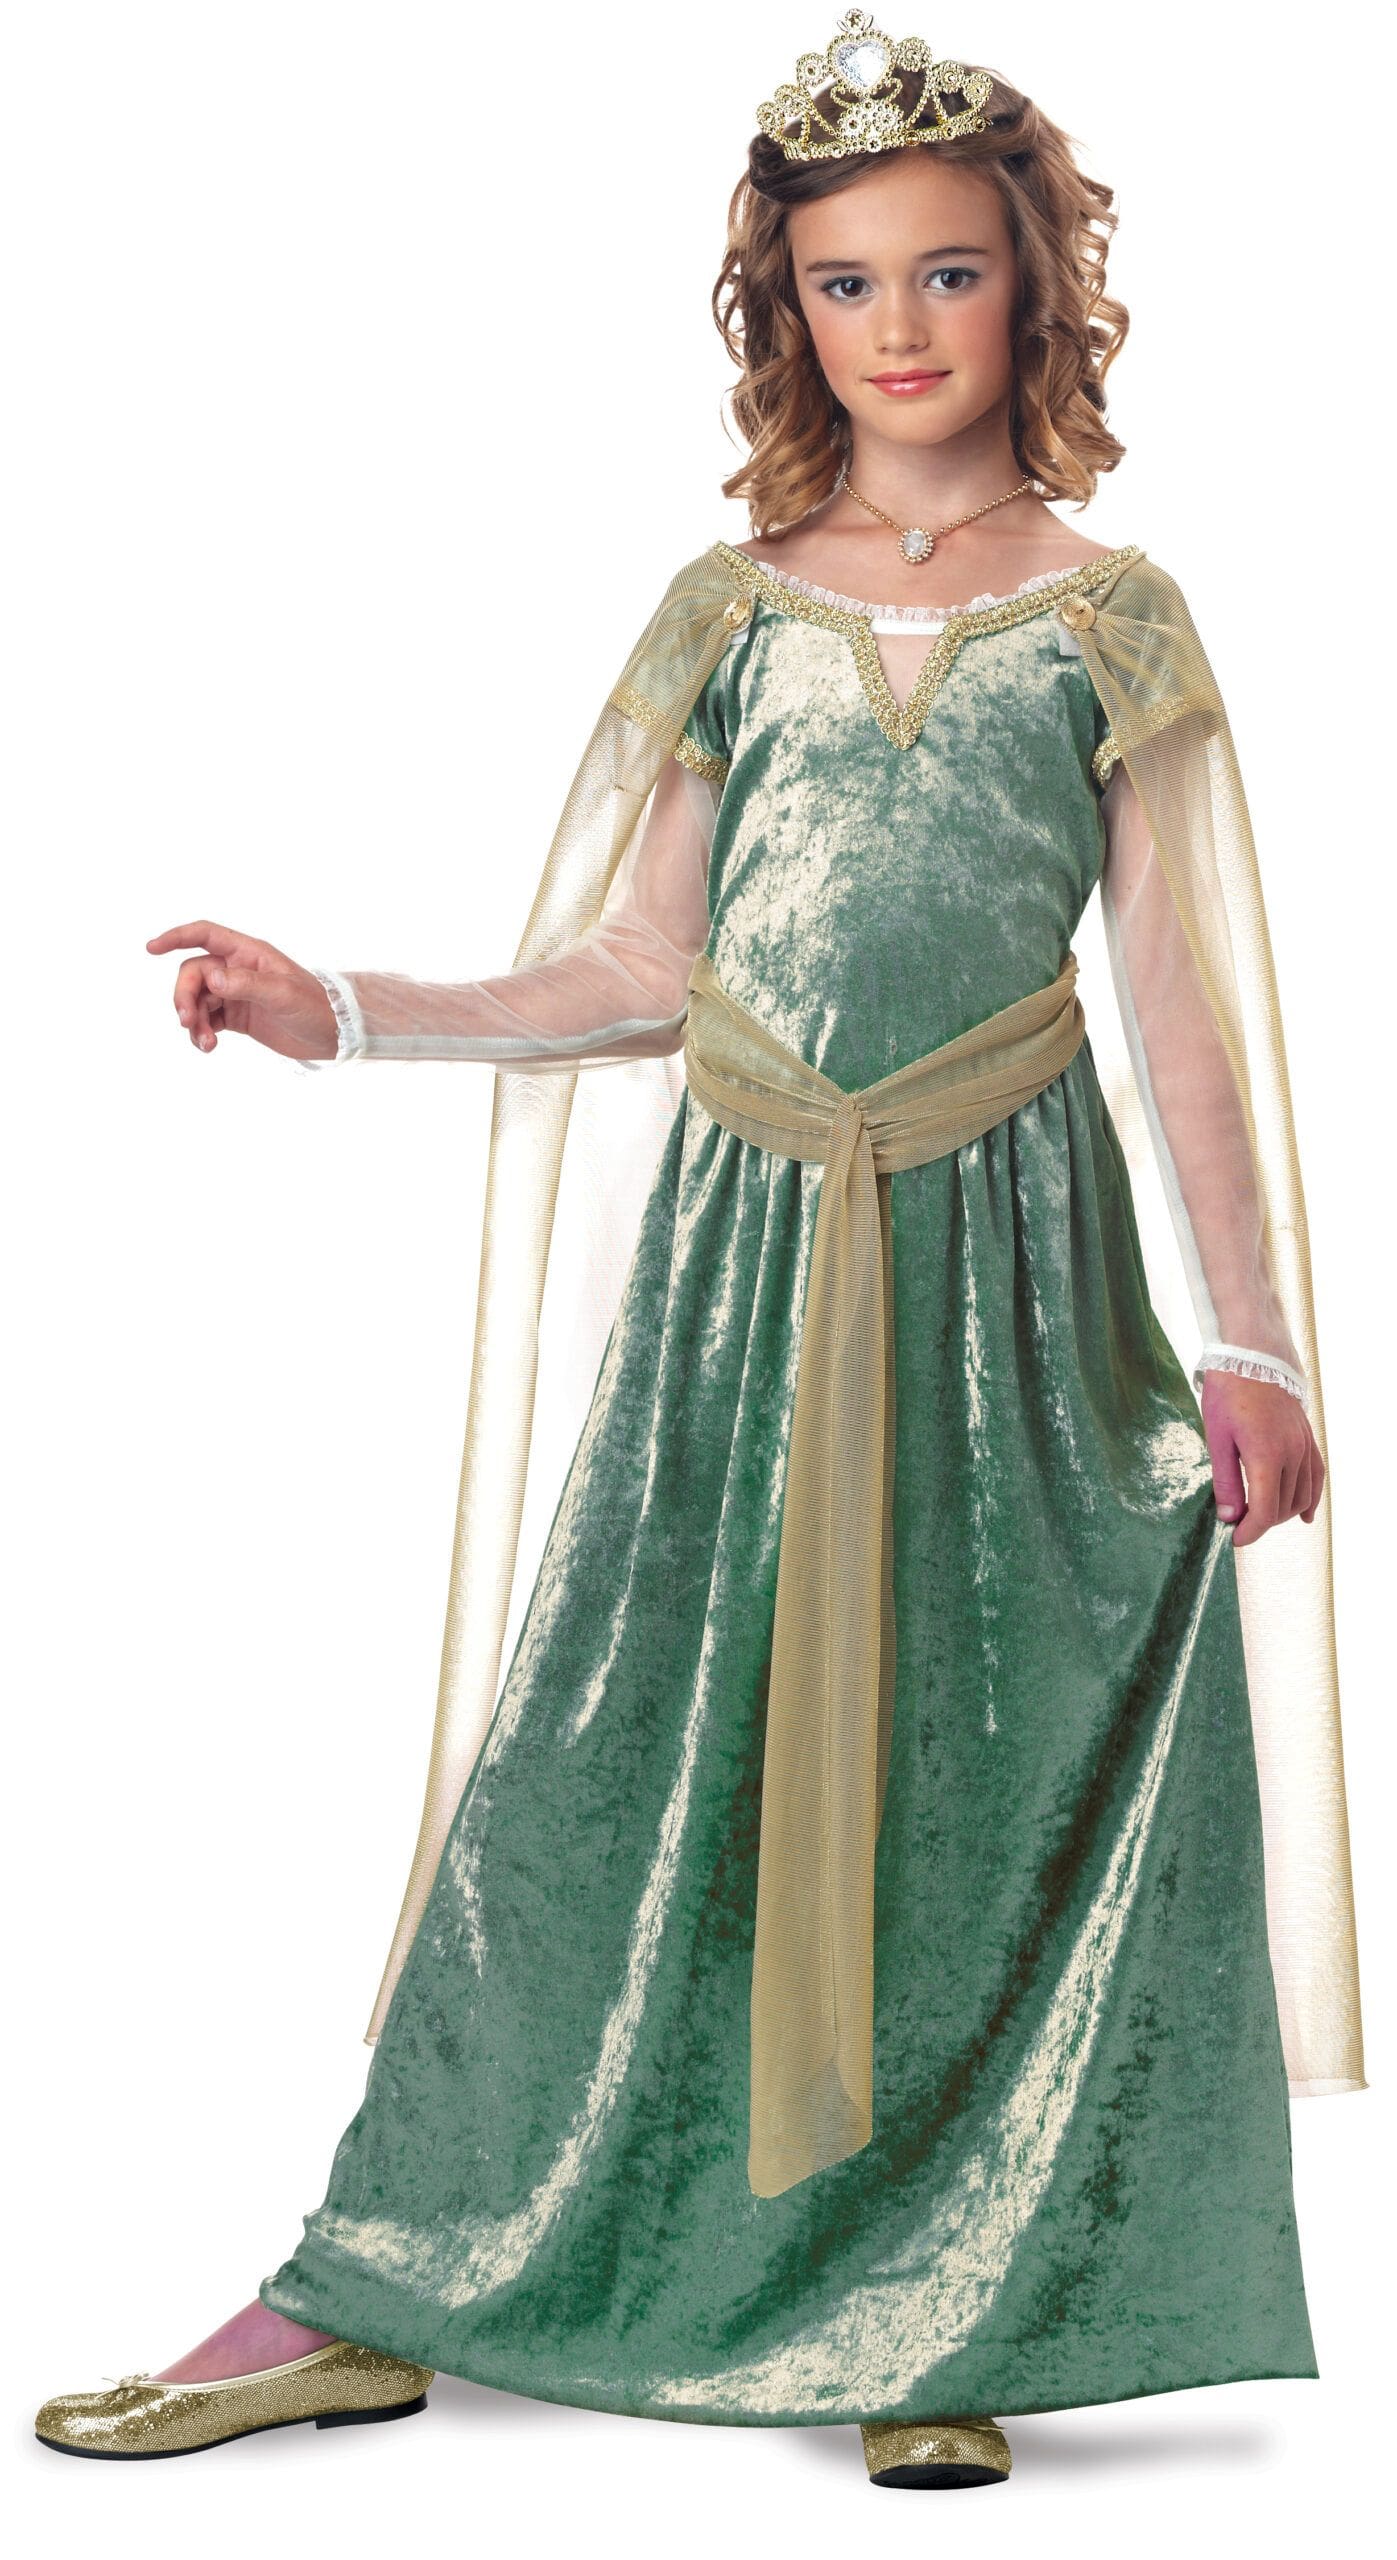 Queen Guinevere Child Costume, Medium - The Party Place